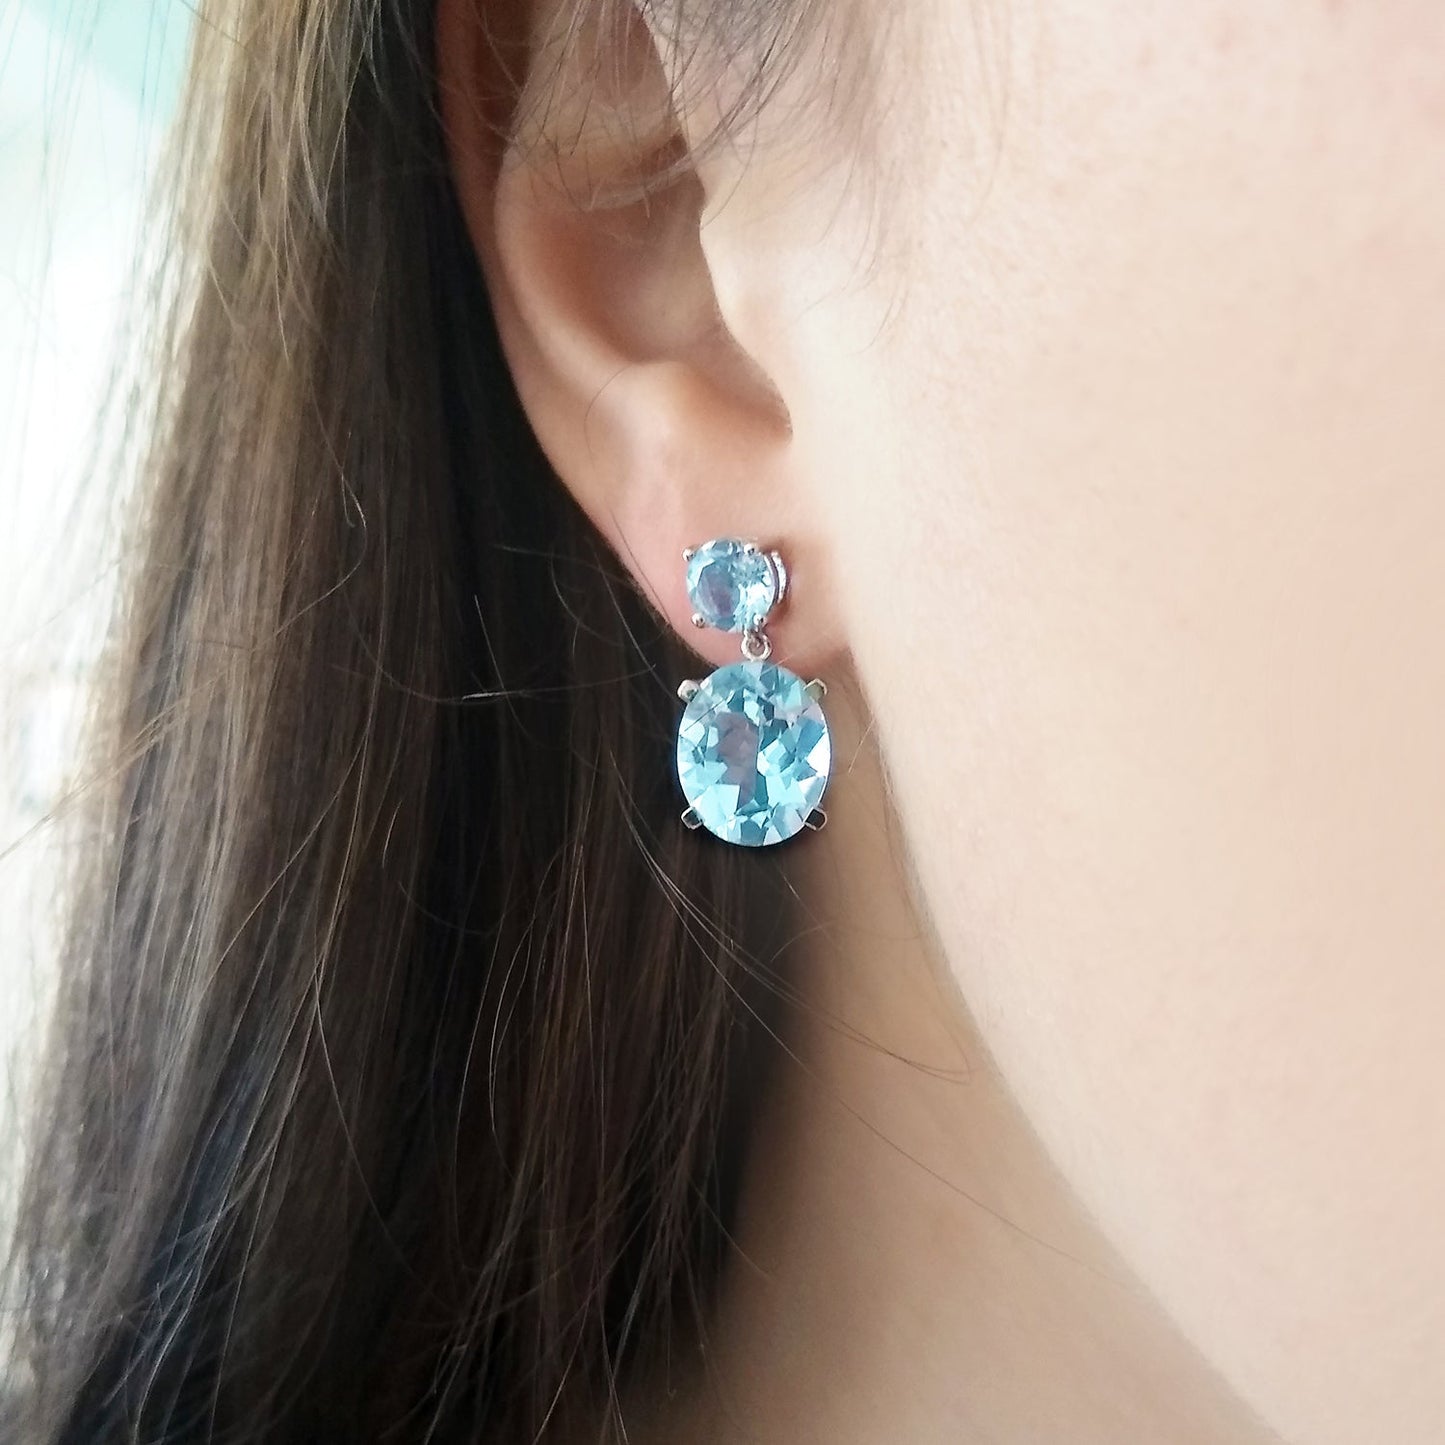 Sky Blue Topaz Silver Drop Earrings | The South of France Collection | Augustine Jewels | Gemstone Earrings